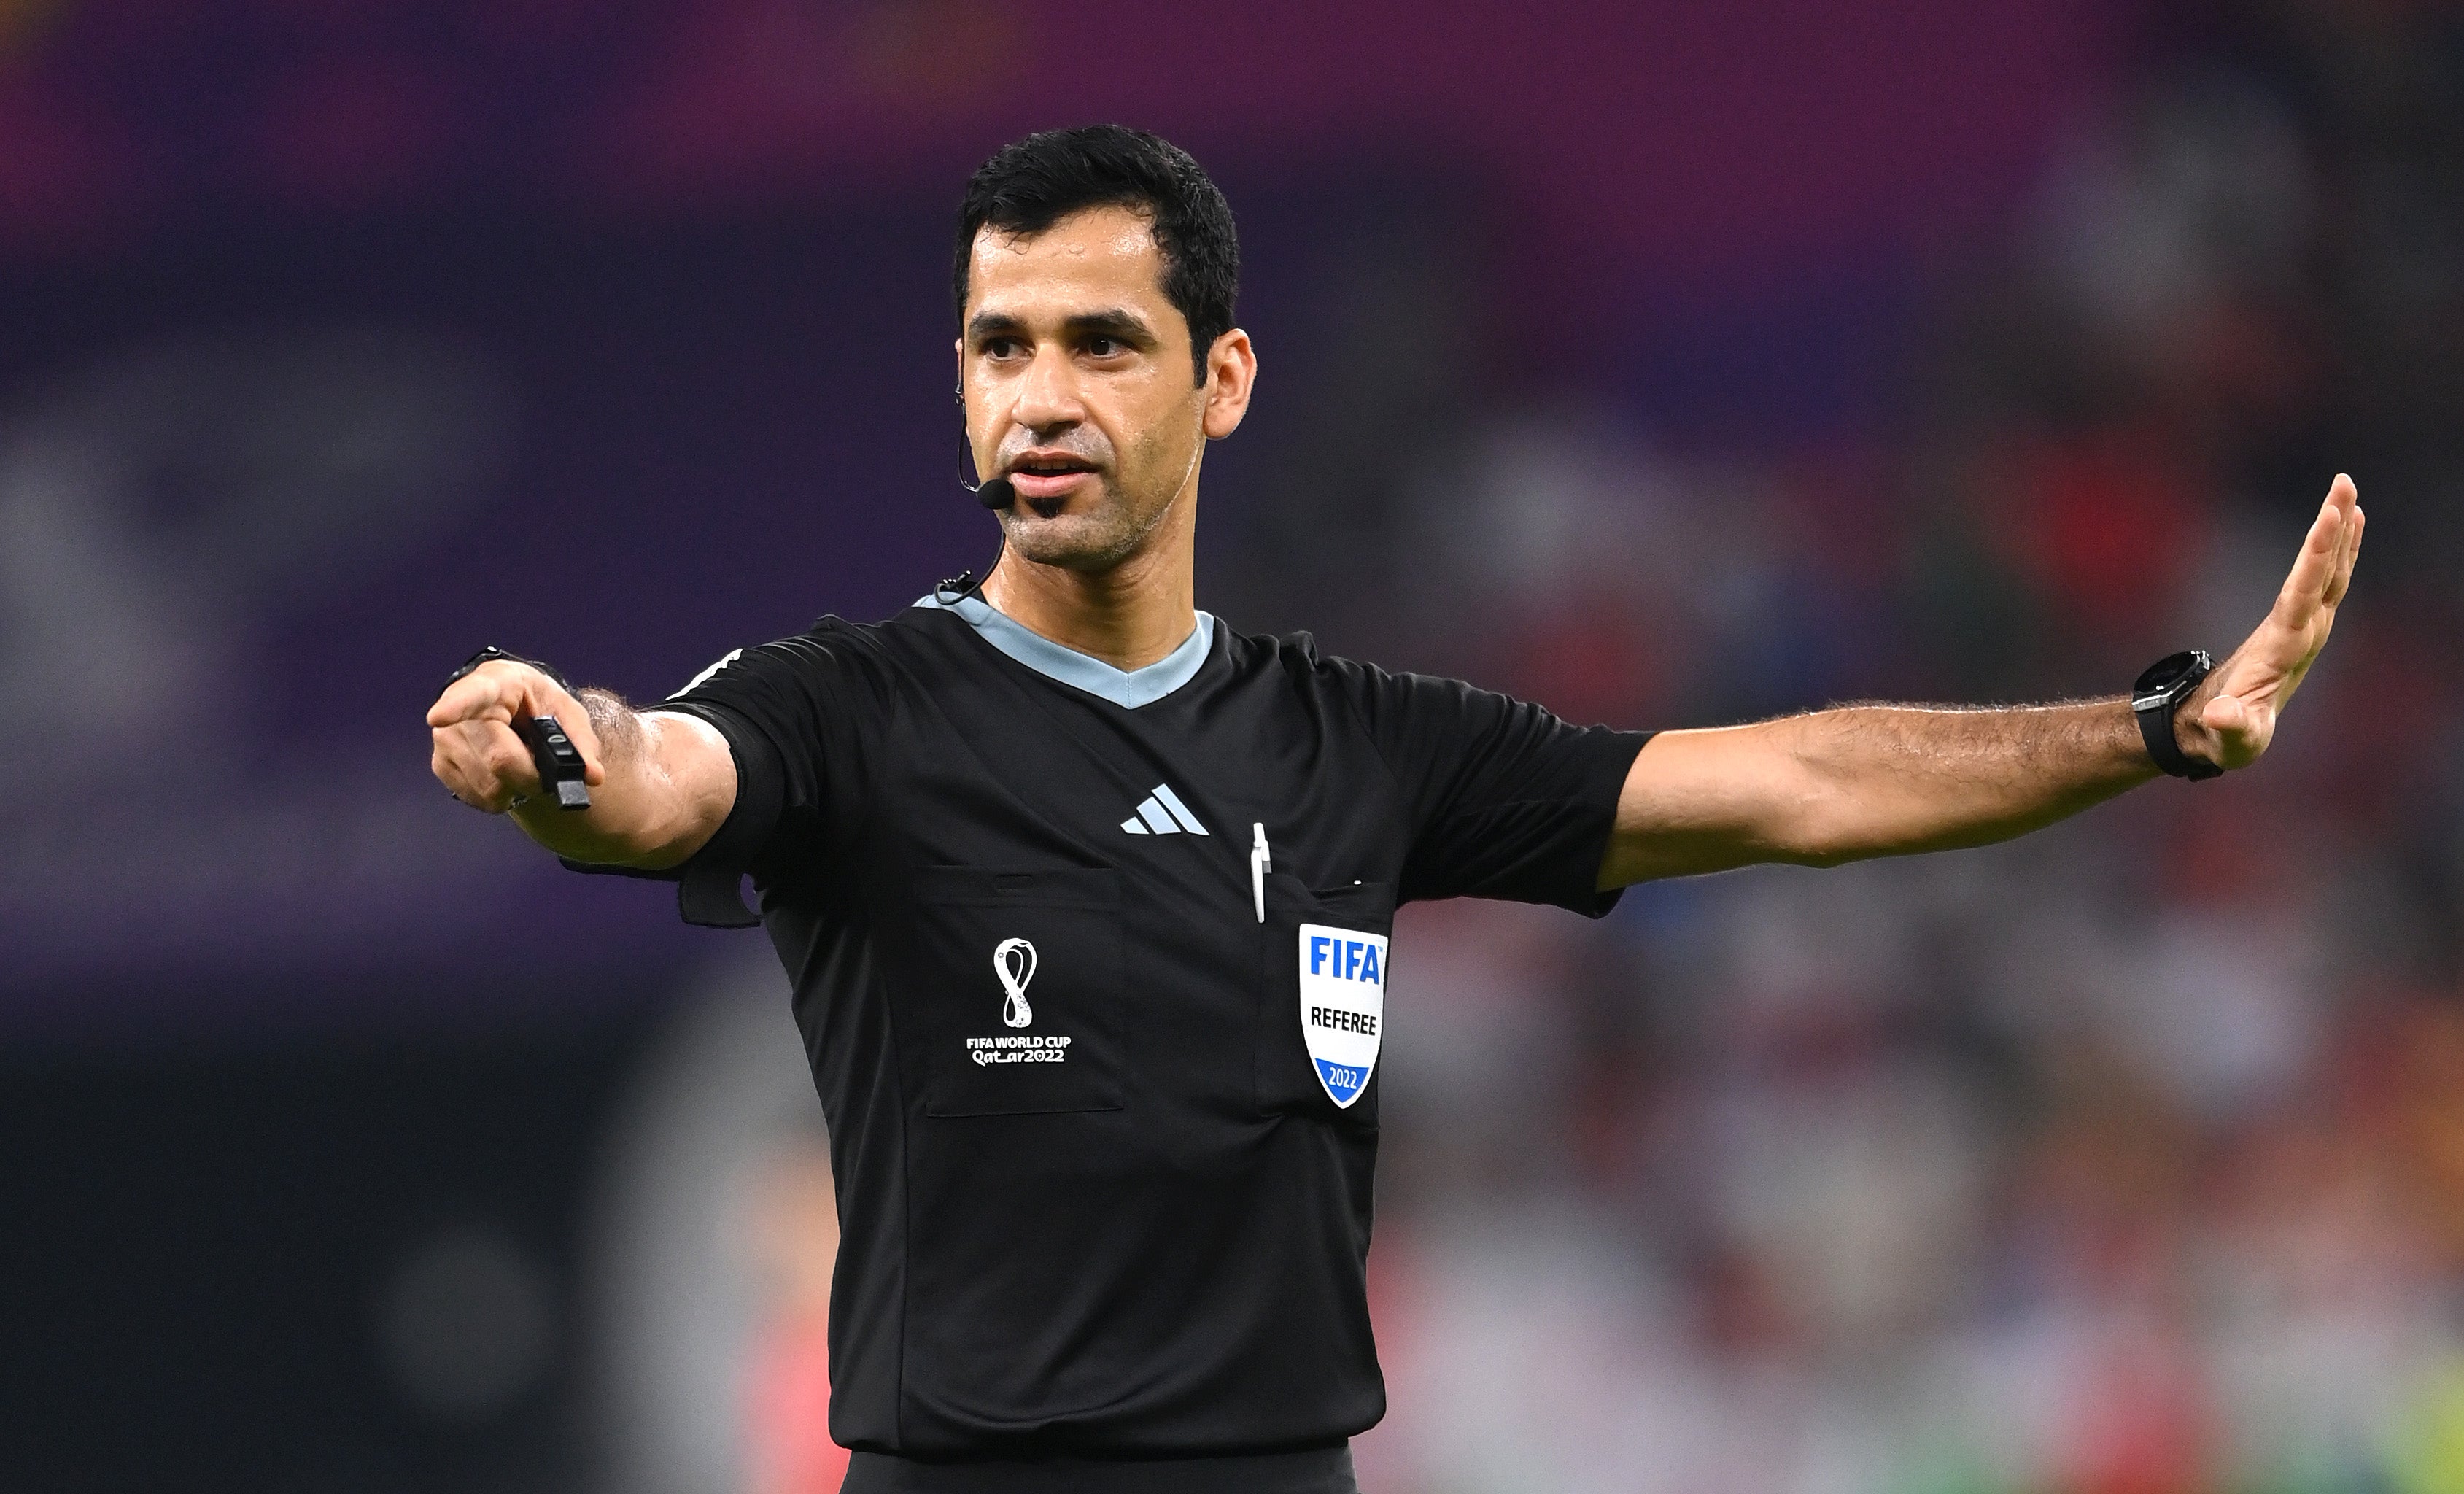 Qatari referee Abdulrahman Al-Jassim is in charge of today’s World Cup third-place play-off between Croatia and Morocco